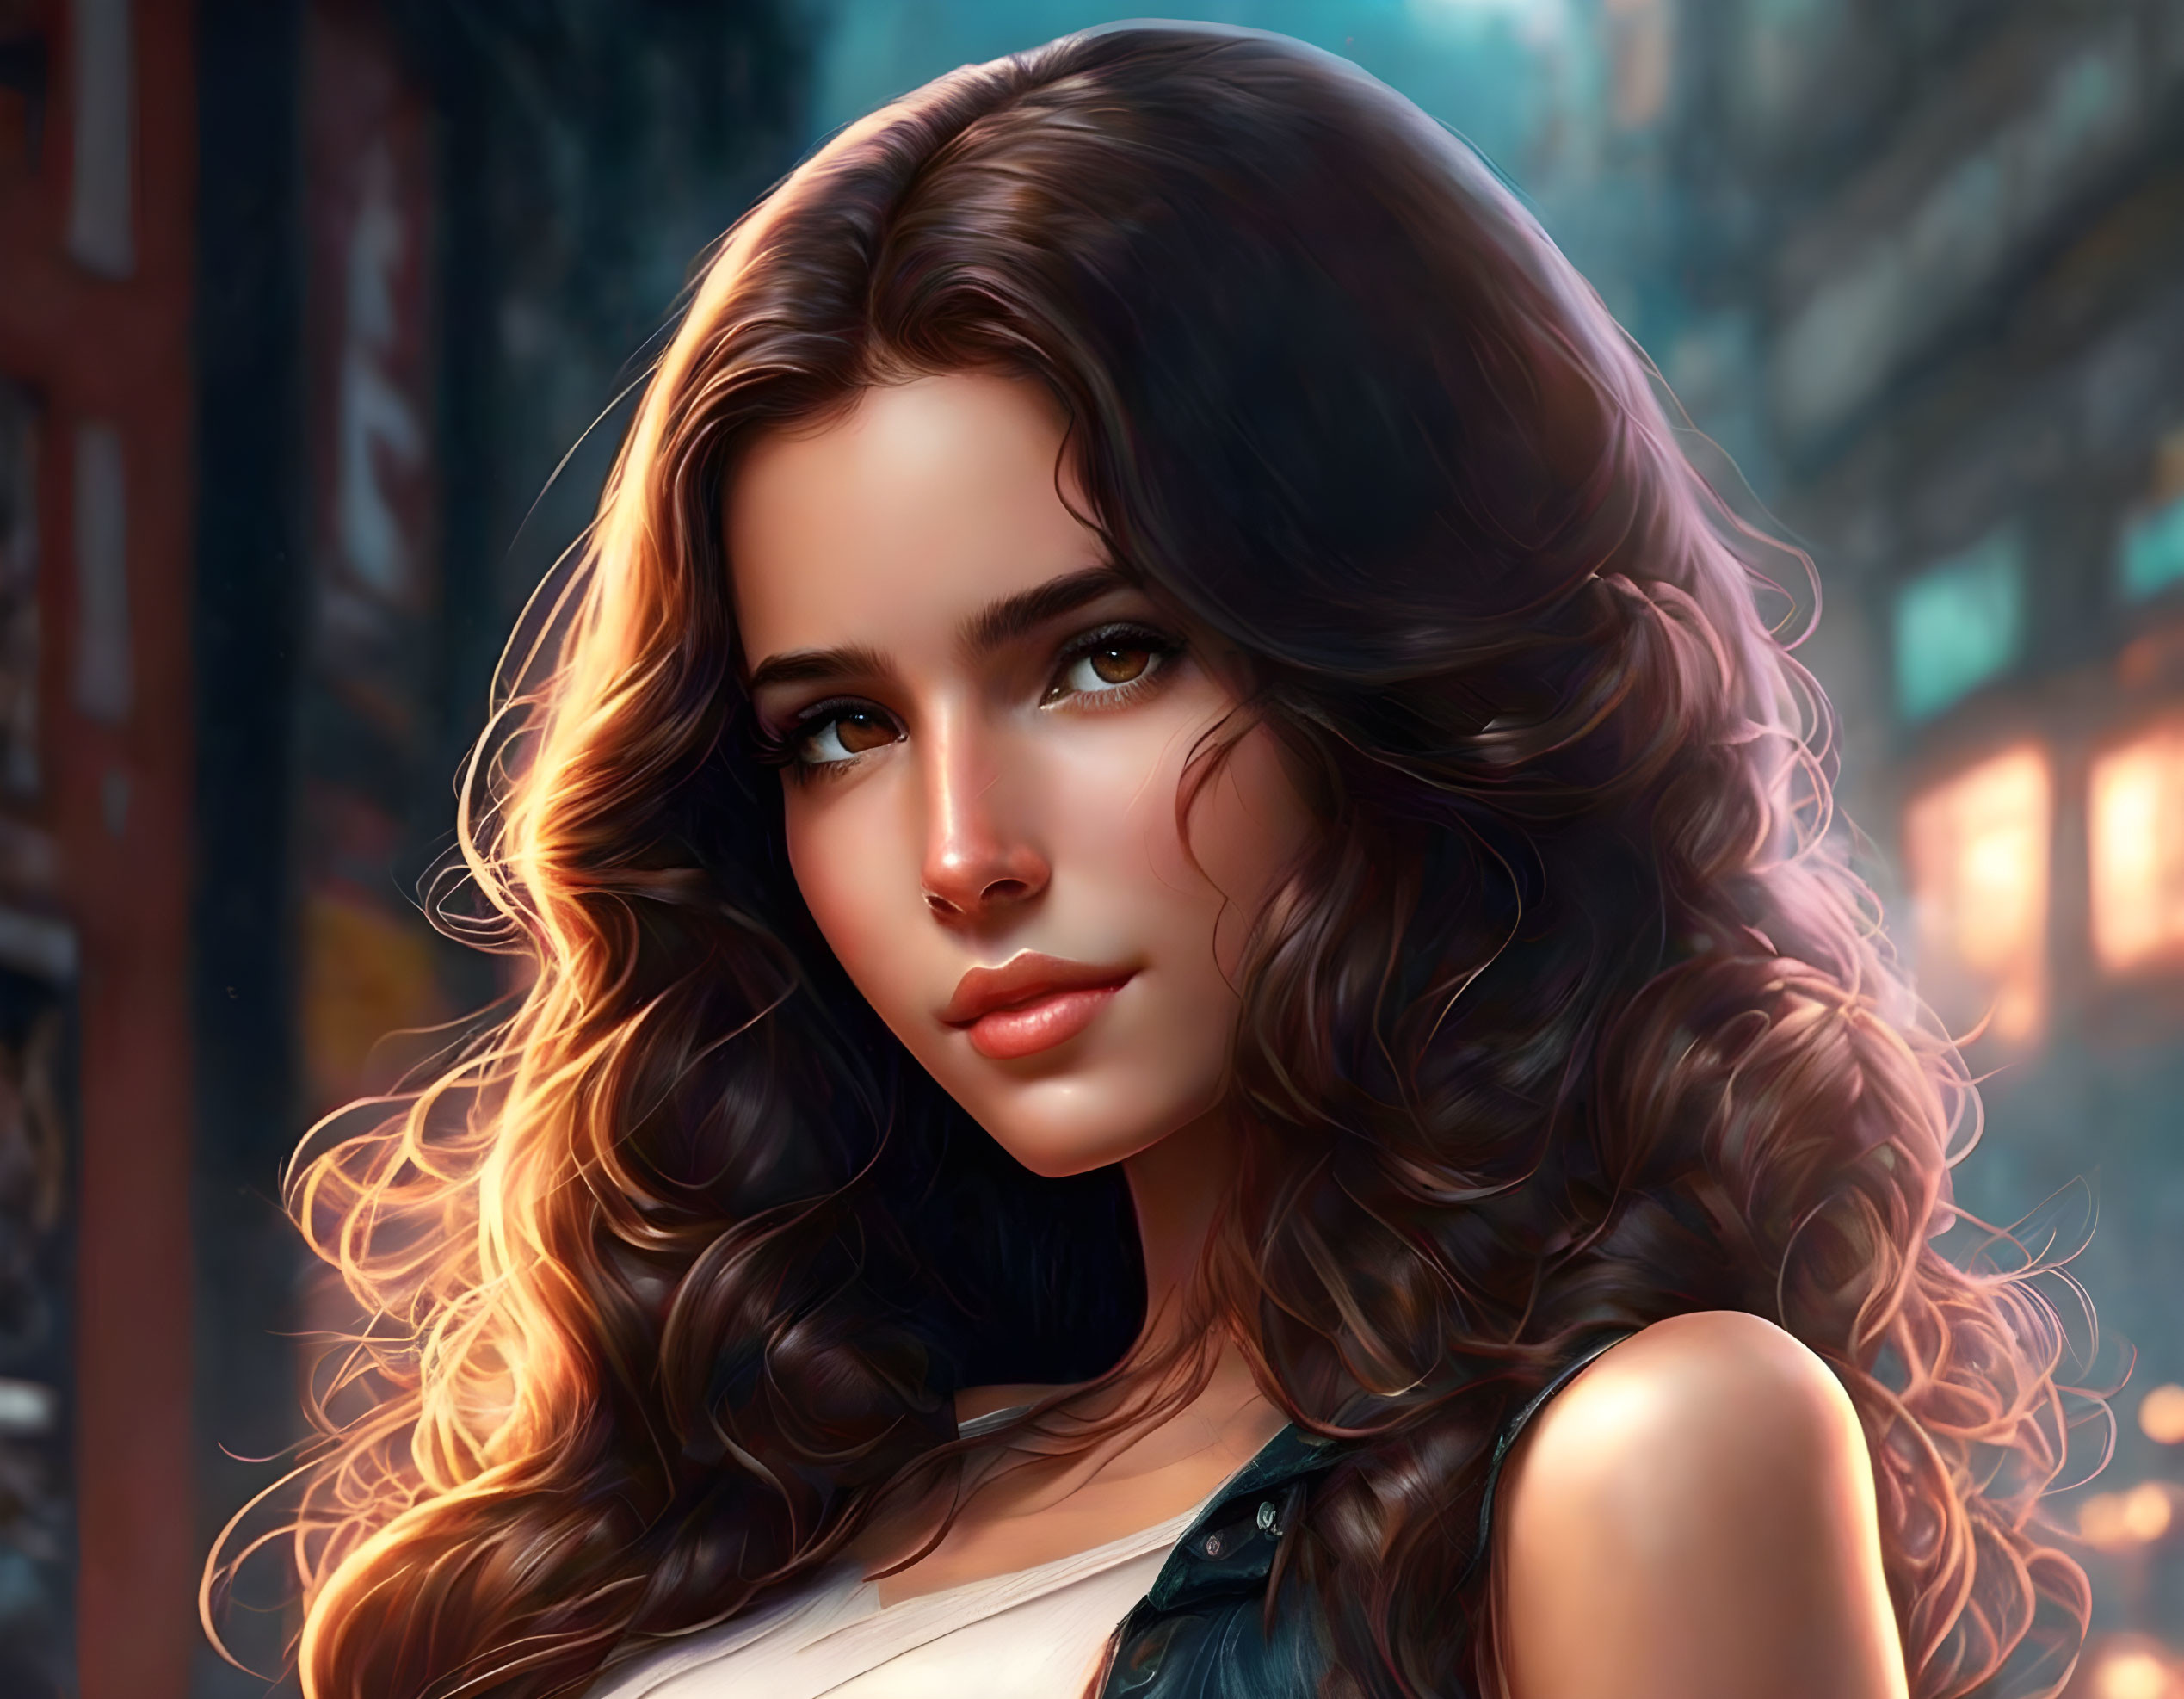 Young woman with long, wavy brown hair in front of city lights.